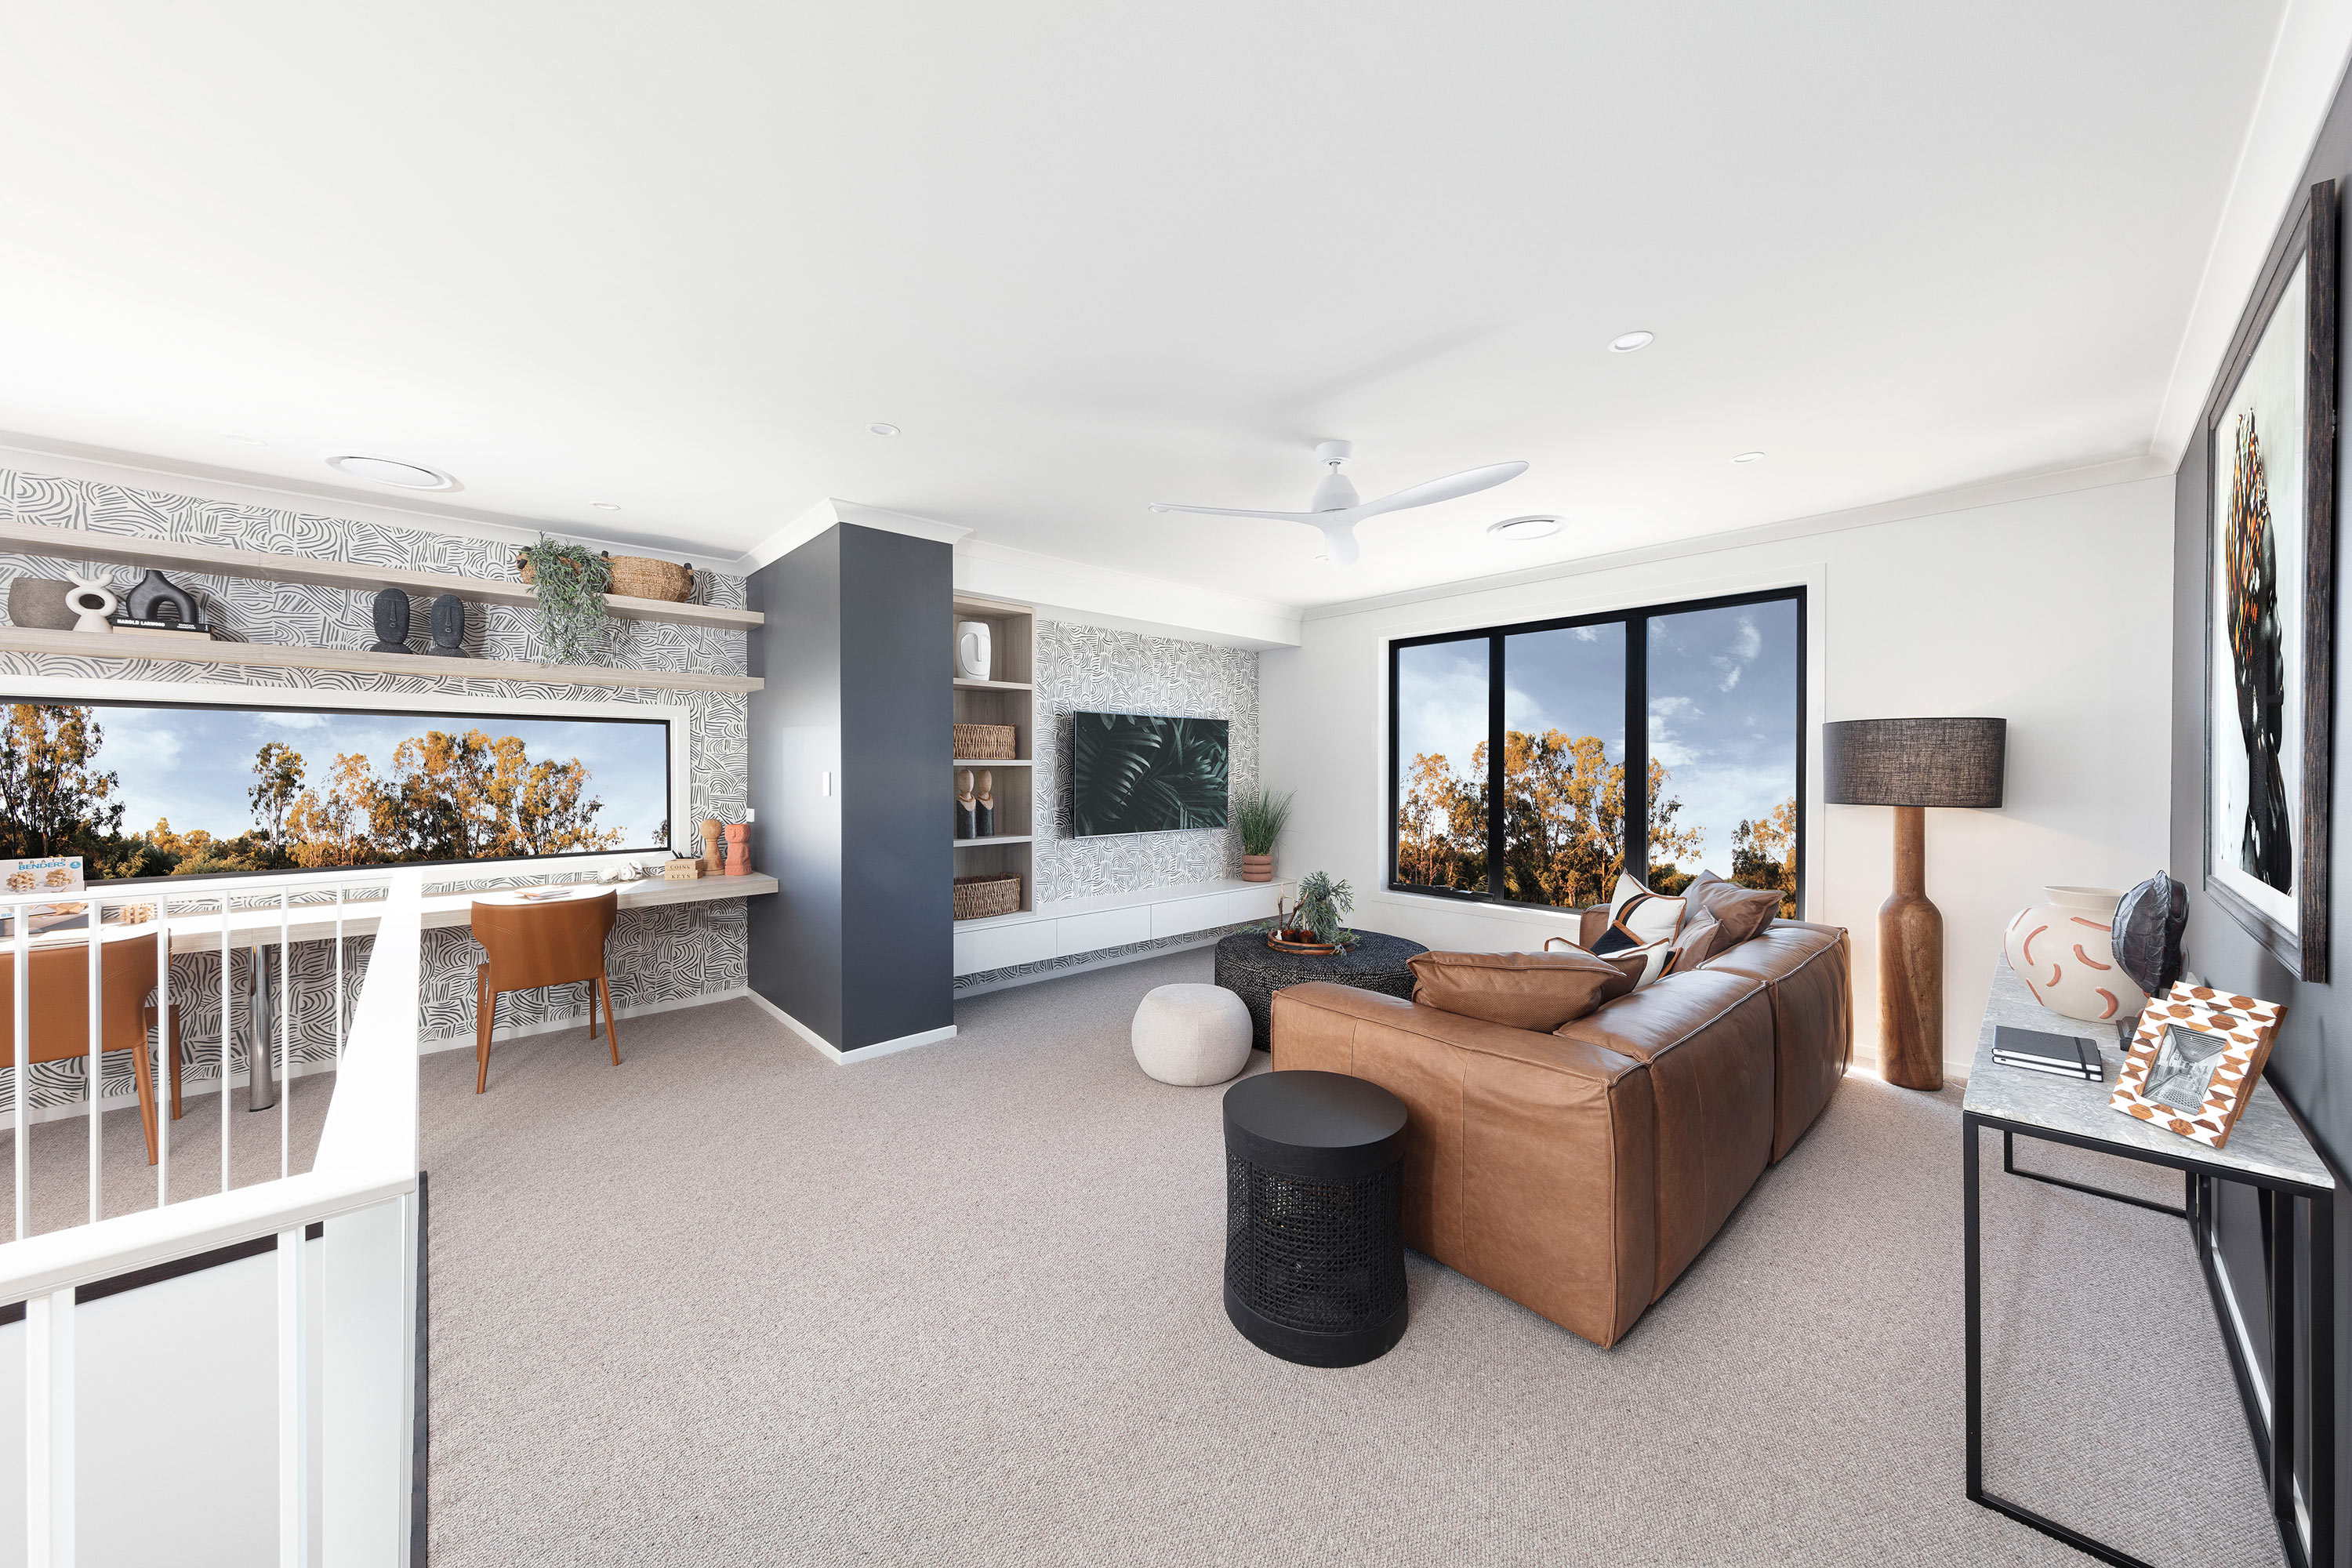  Harvey Home Design. Check it out online or in-person at the Aura, Caloundra West display village